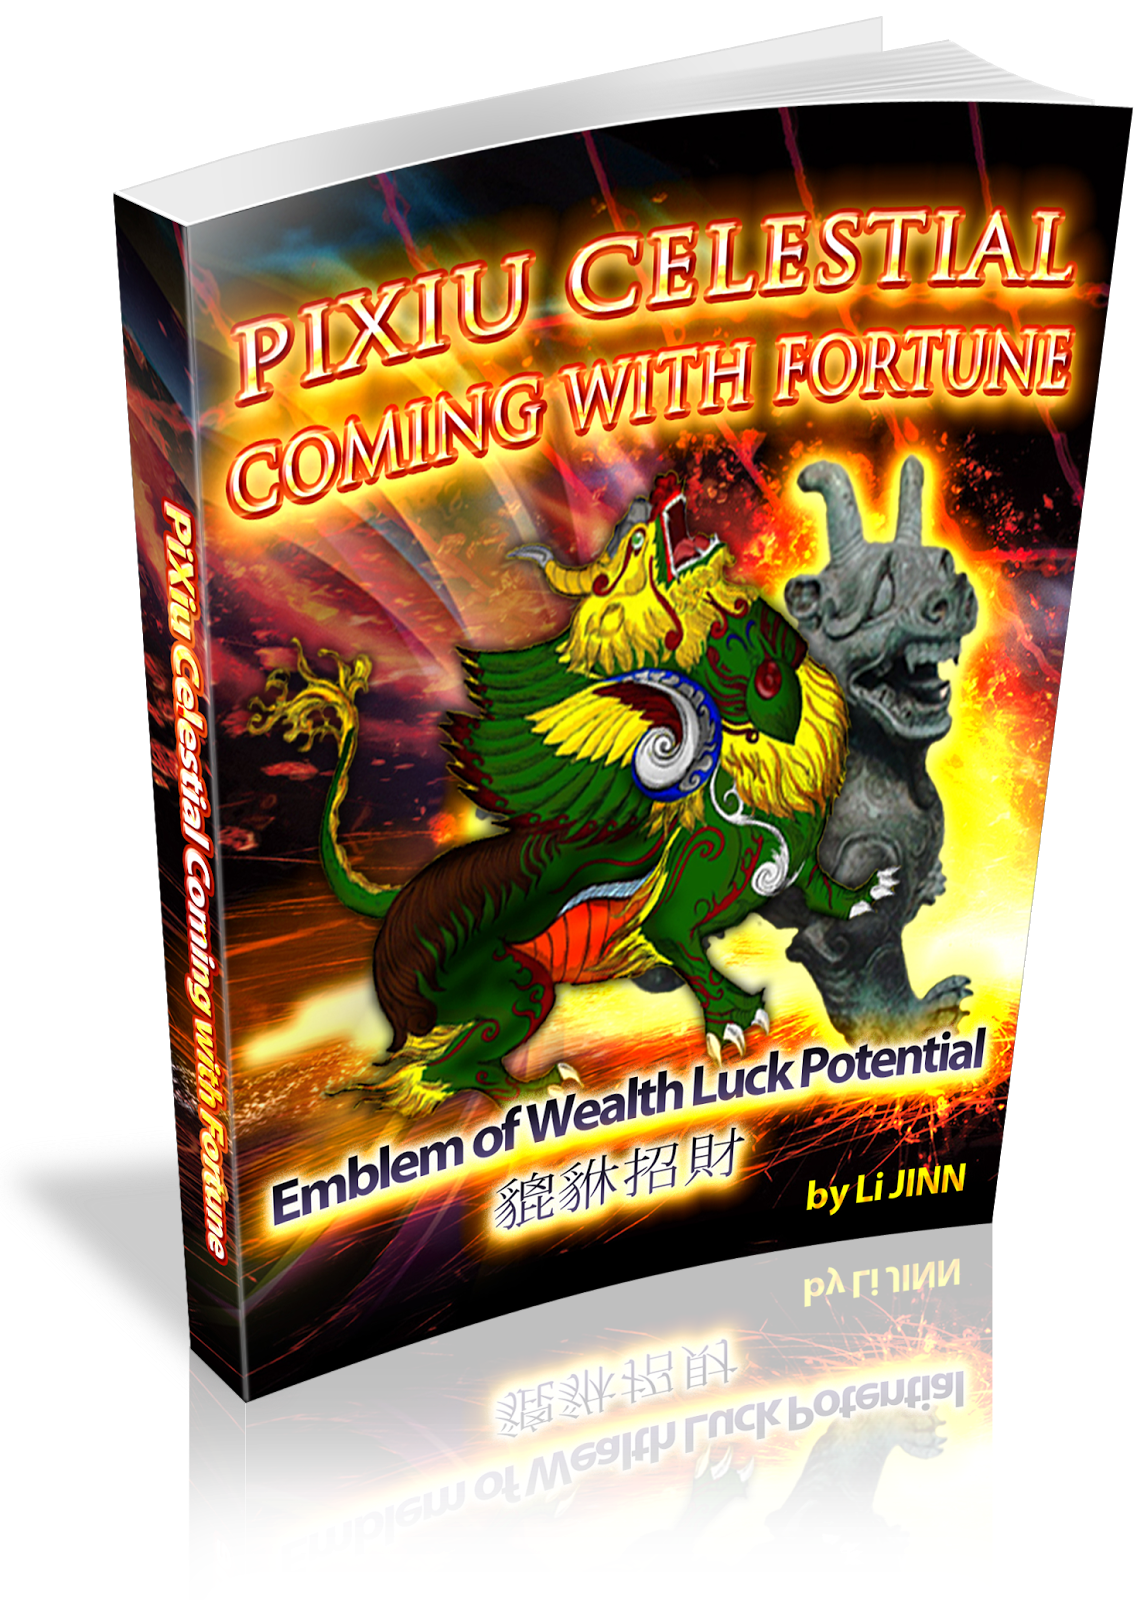 PiXiu Celestial - Coming with Fortune